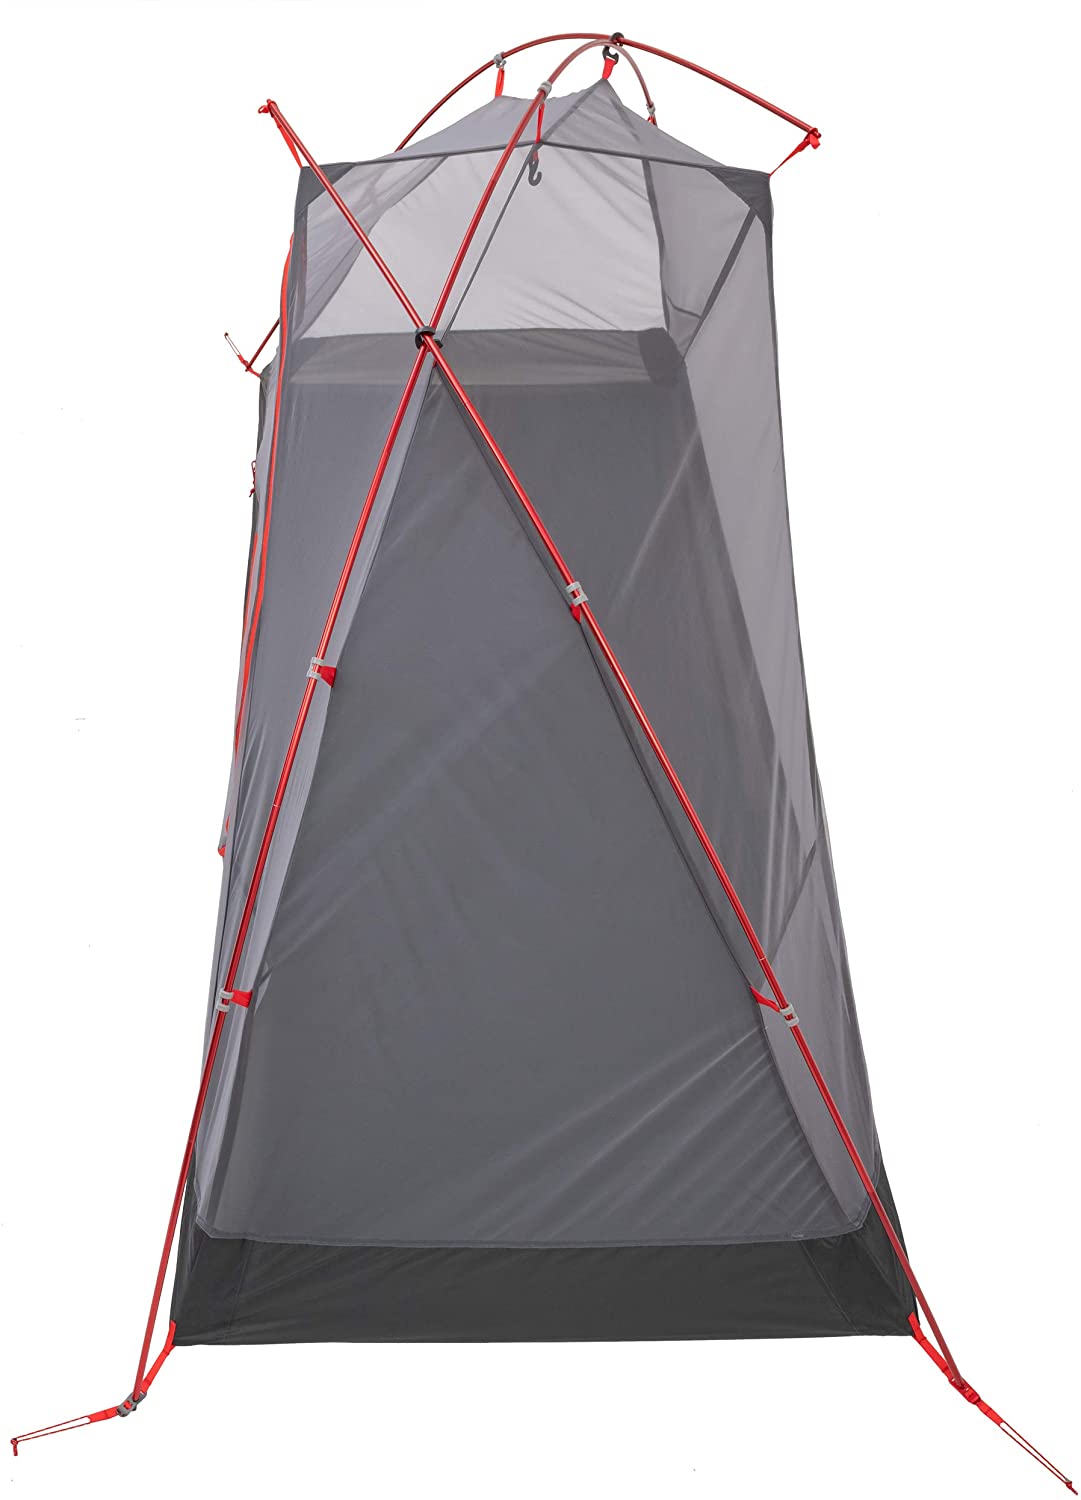 Stay Covered on Your Next Backpacking Trip with the Helix 1 and 2 Person Tents